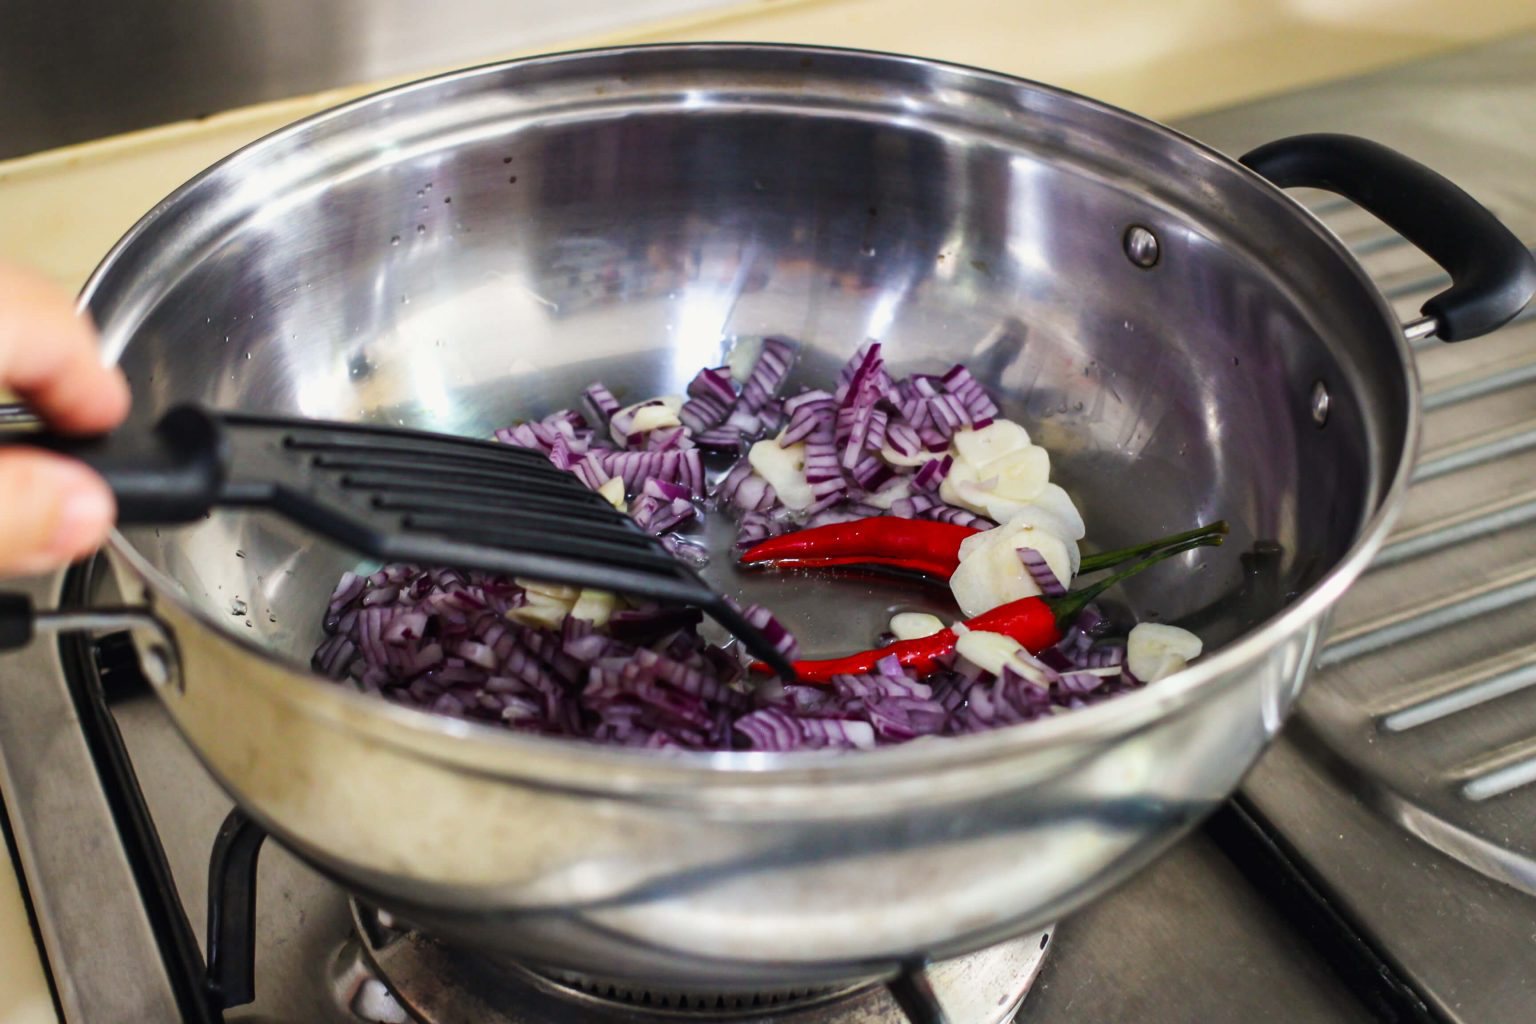 A pan sautéing diced red onion, garlic and peppers.